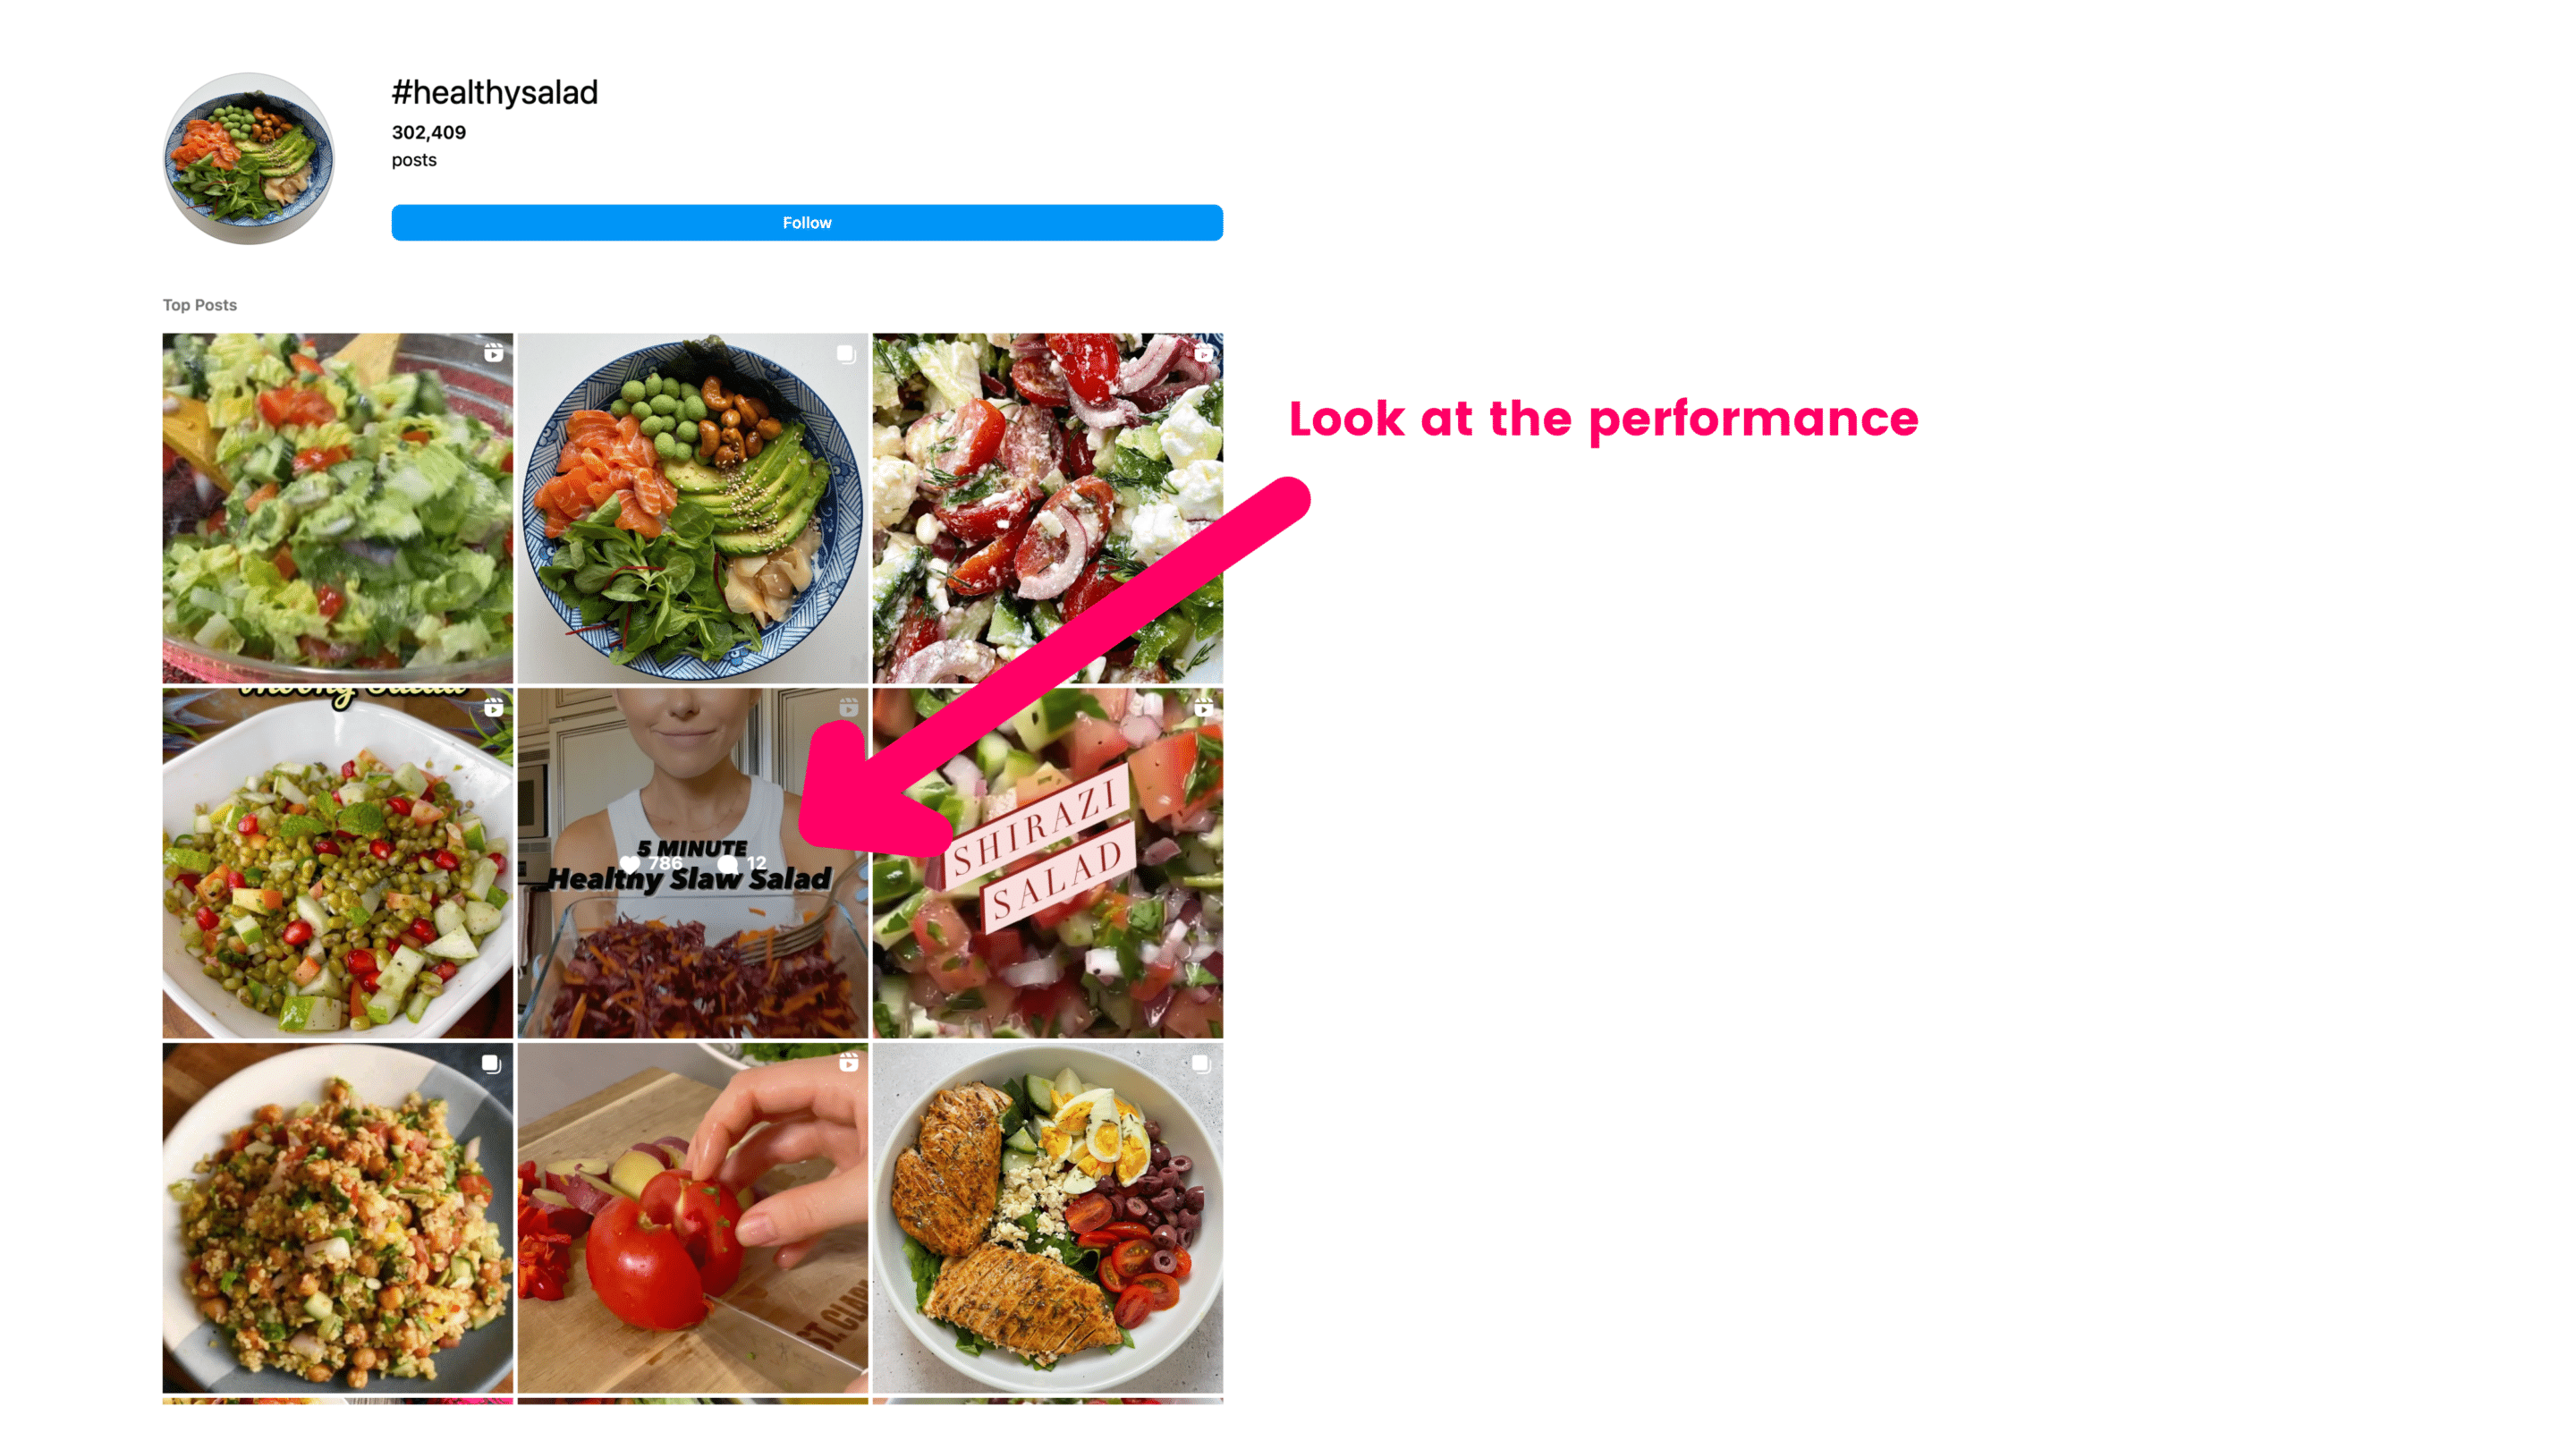 A picture of a salad with a red arrow pointing to it.